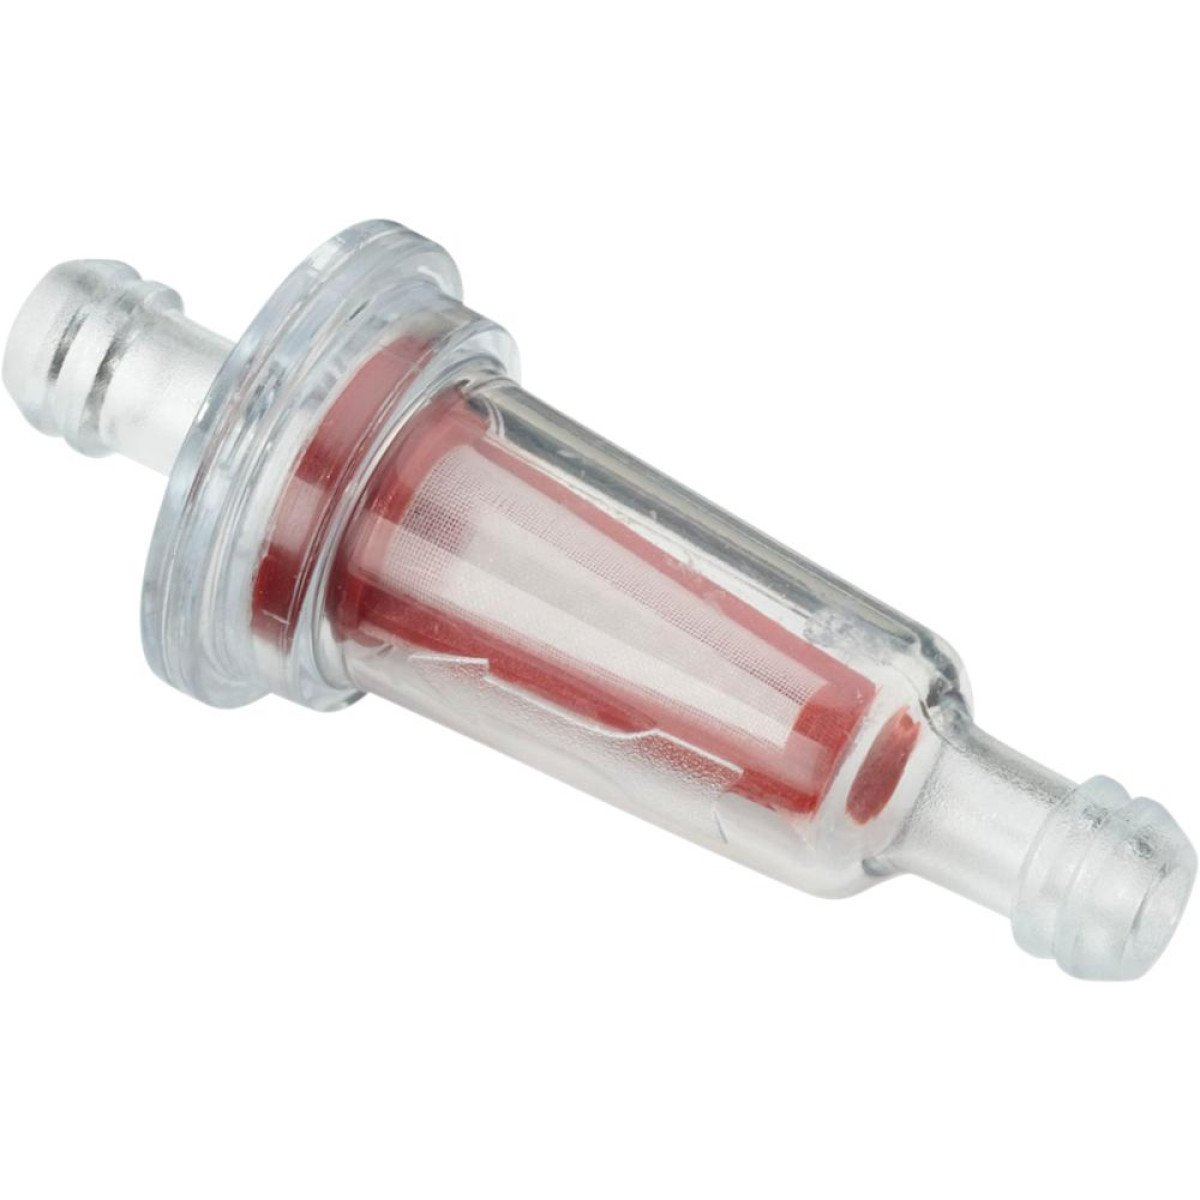 Moose Racing Fuel Filter  for 6.4 to 7.9 mm tubing, transparent/red